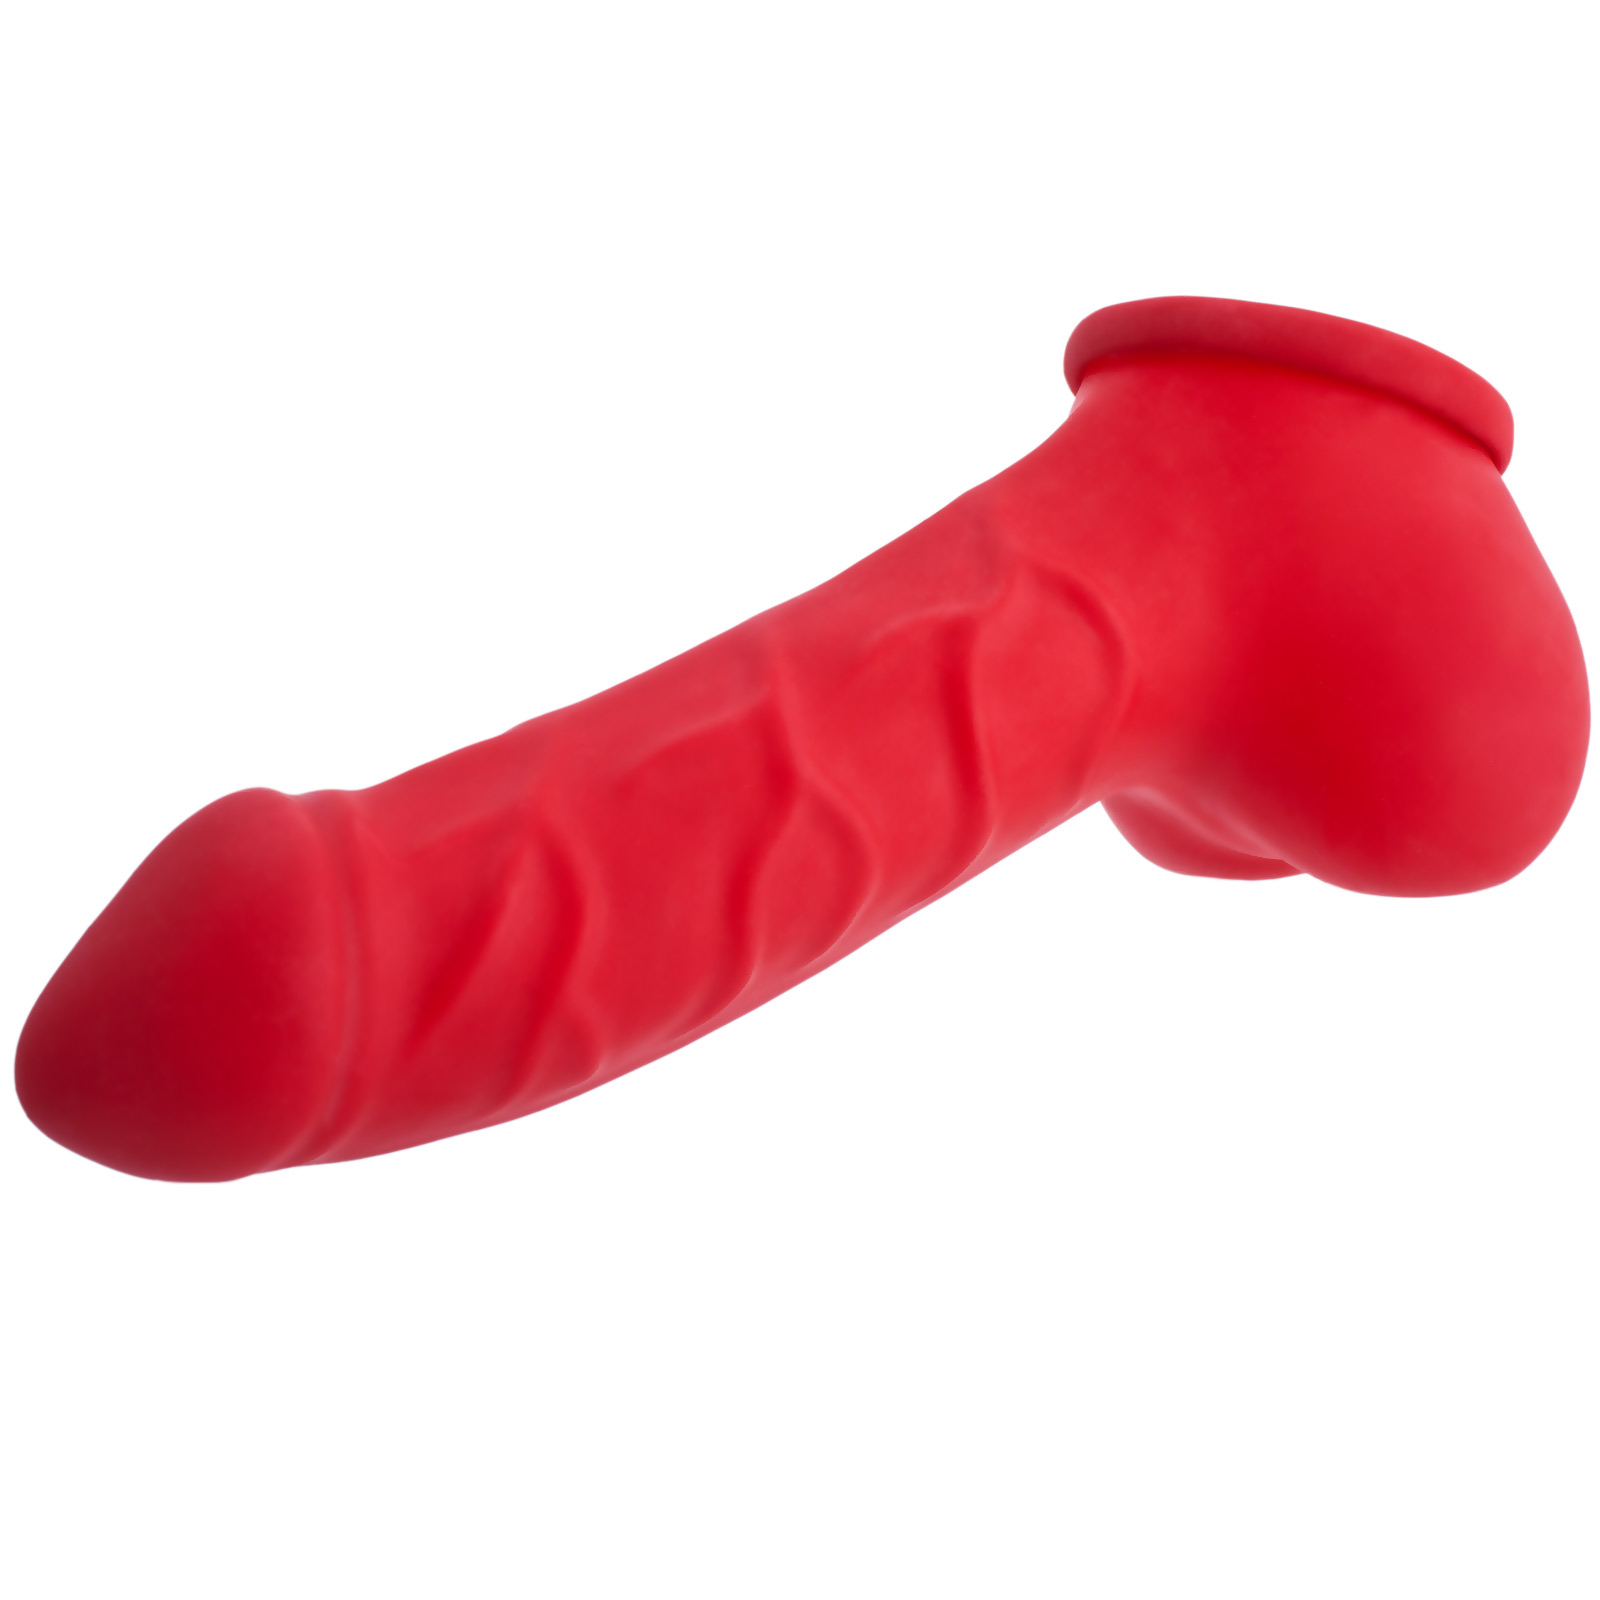 Toylie Latex Penis Sleeve «CARLOS» red, with strong veins and molded scrotum